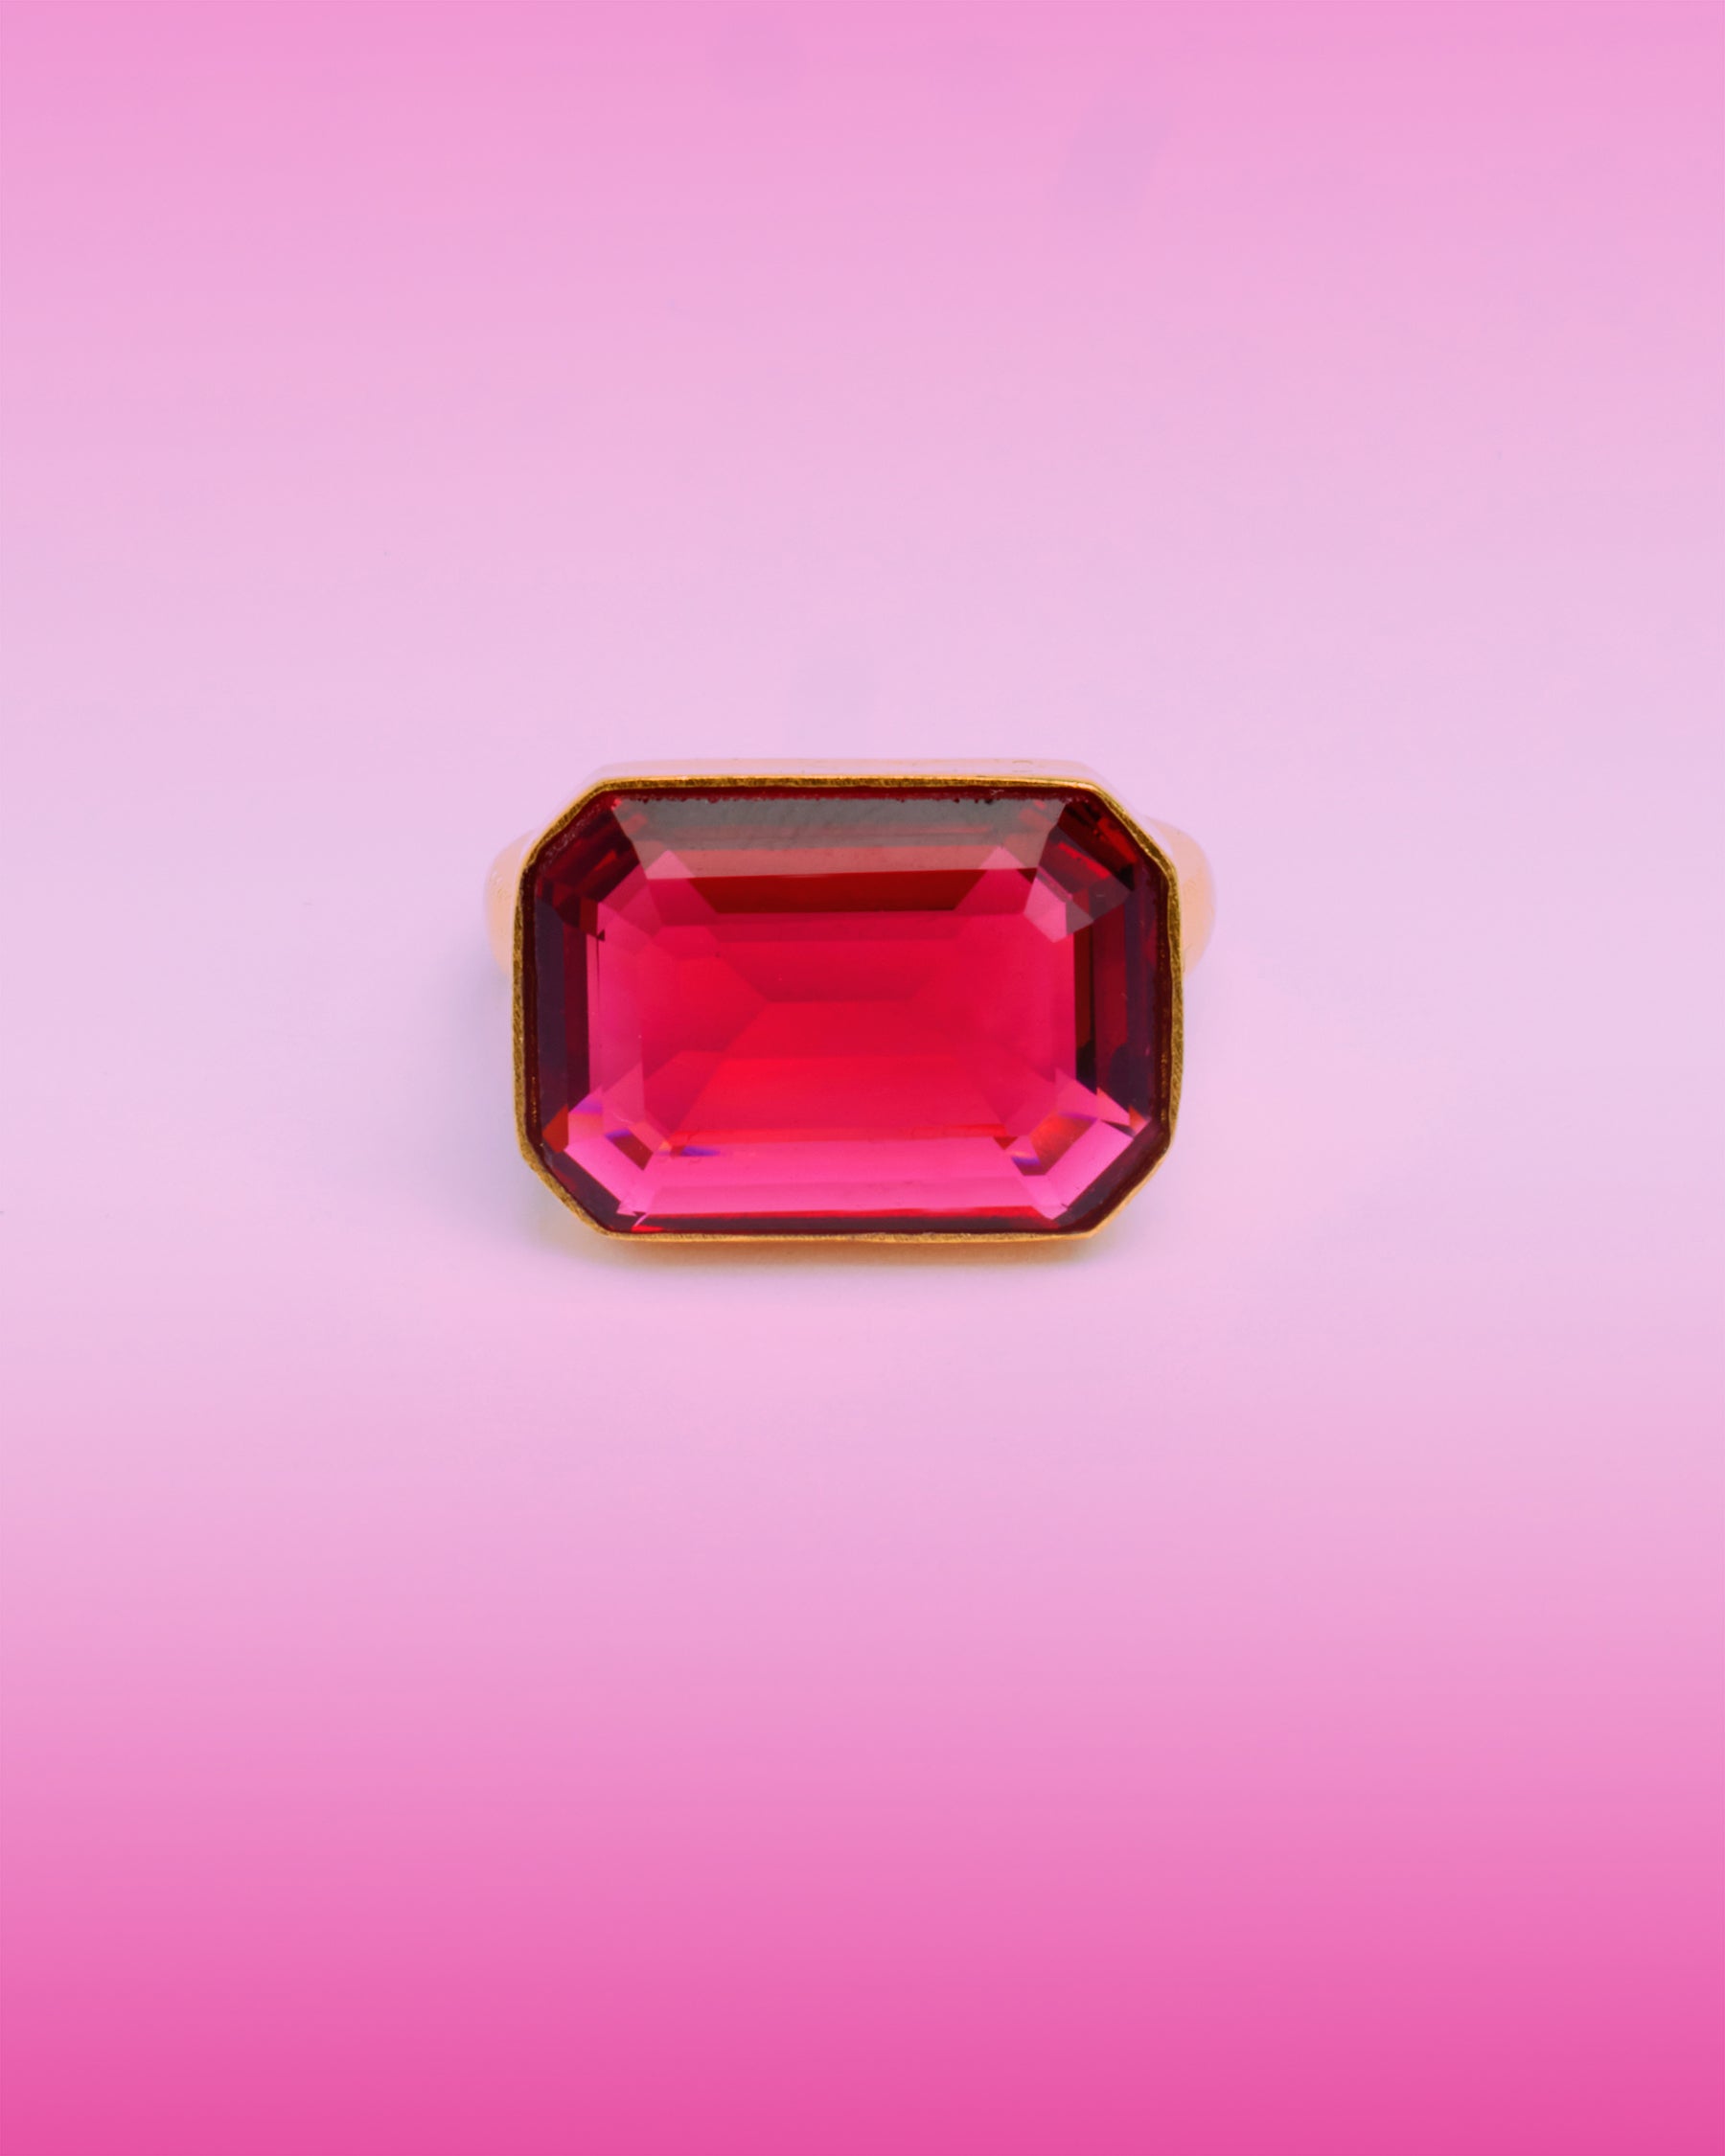 Regency Statement Ring in Ruby Red-Front View